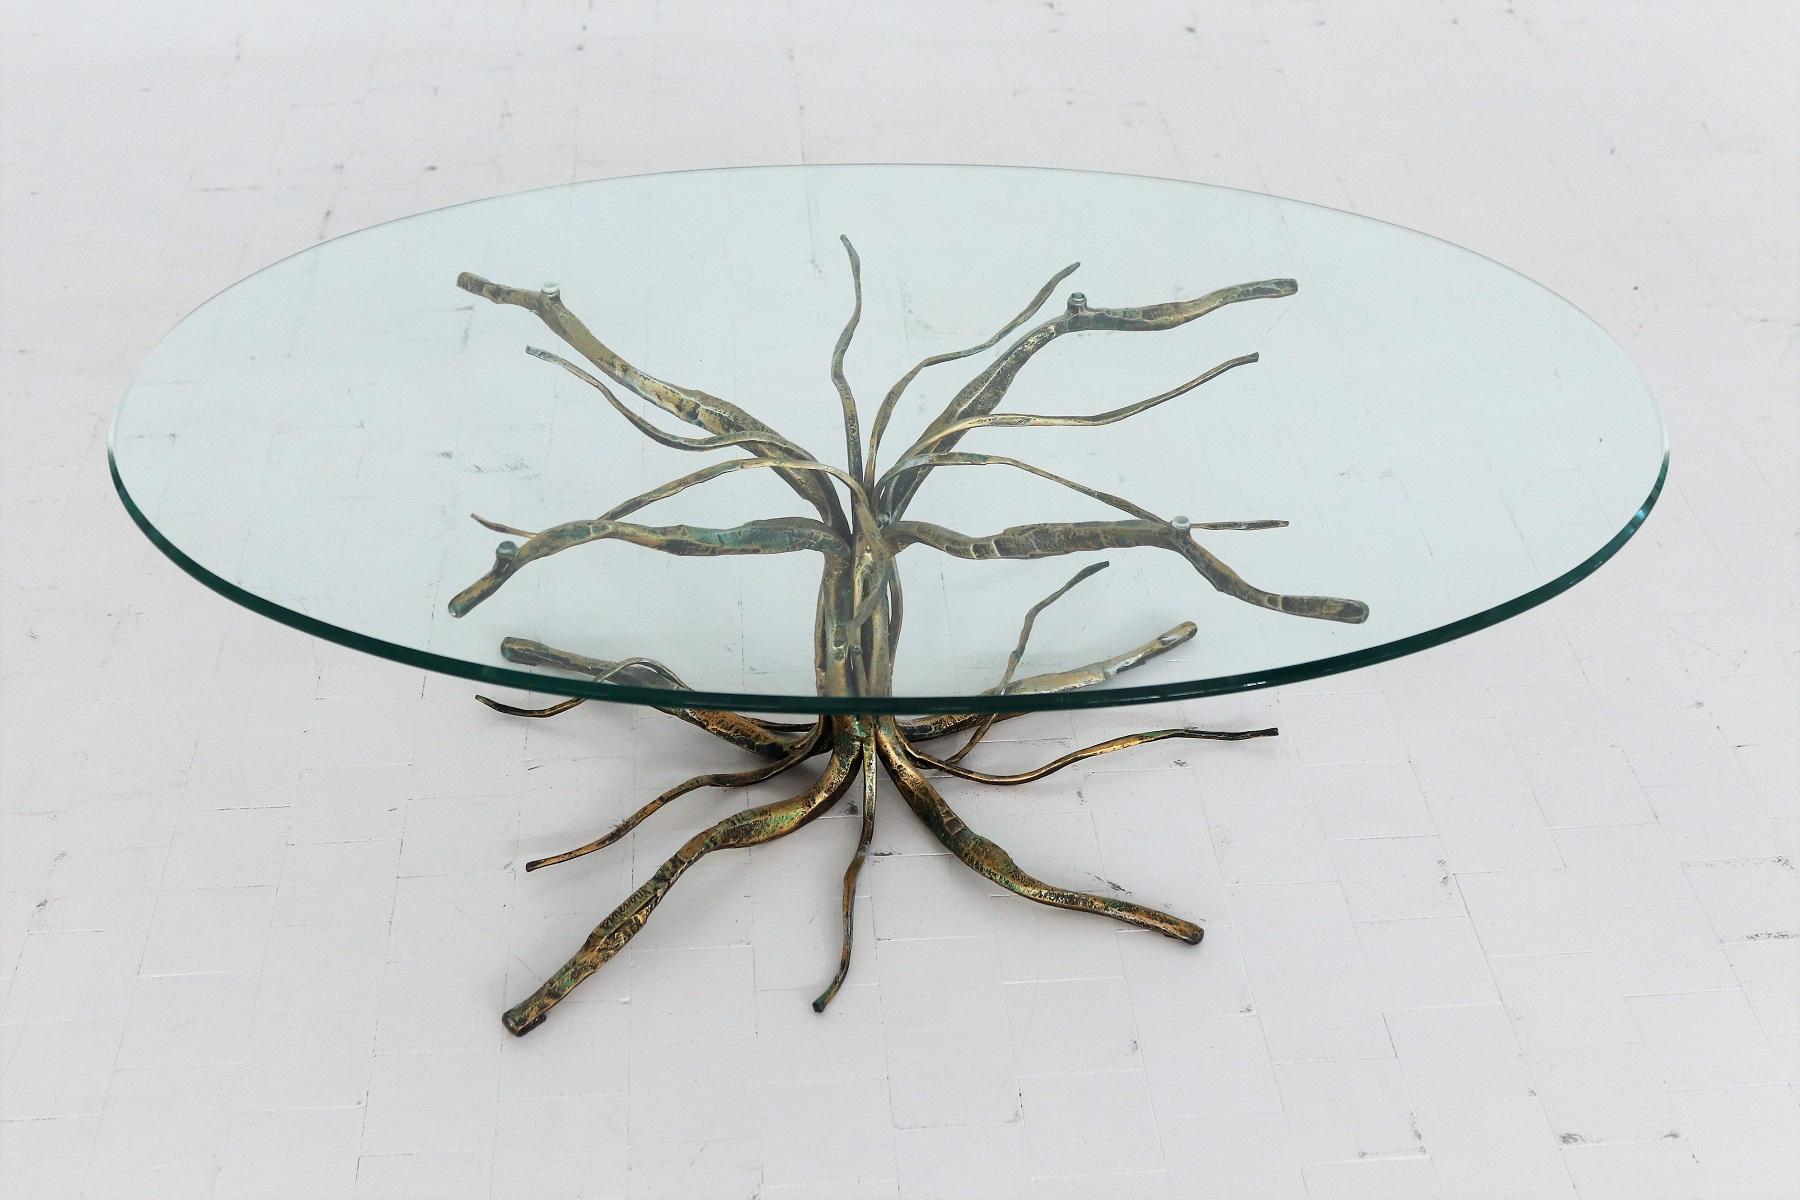 Italian Brutalist Coffee Table in Tree Shape by Salvino Marsura 1960s For Sale 1